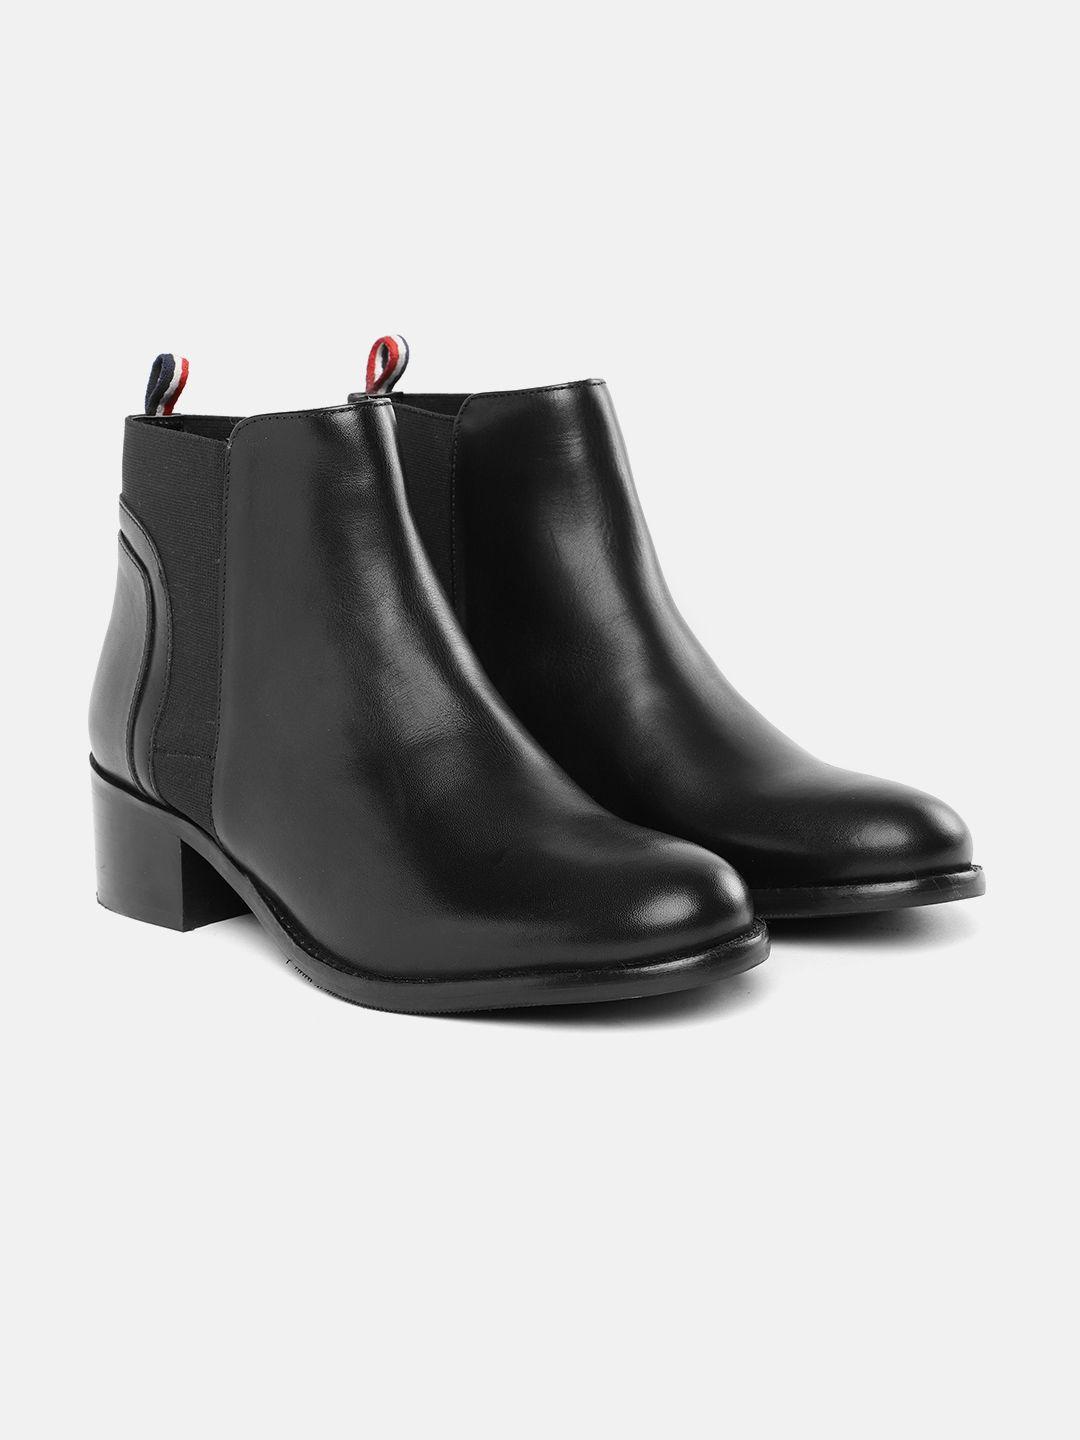 nautica women solid mid-top heeled leather chelsea boots